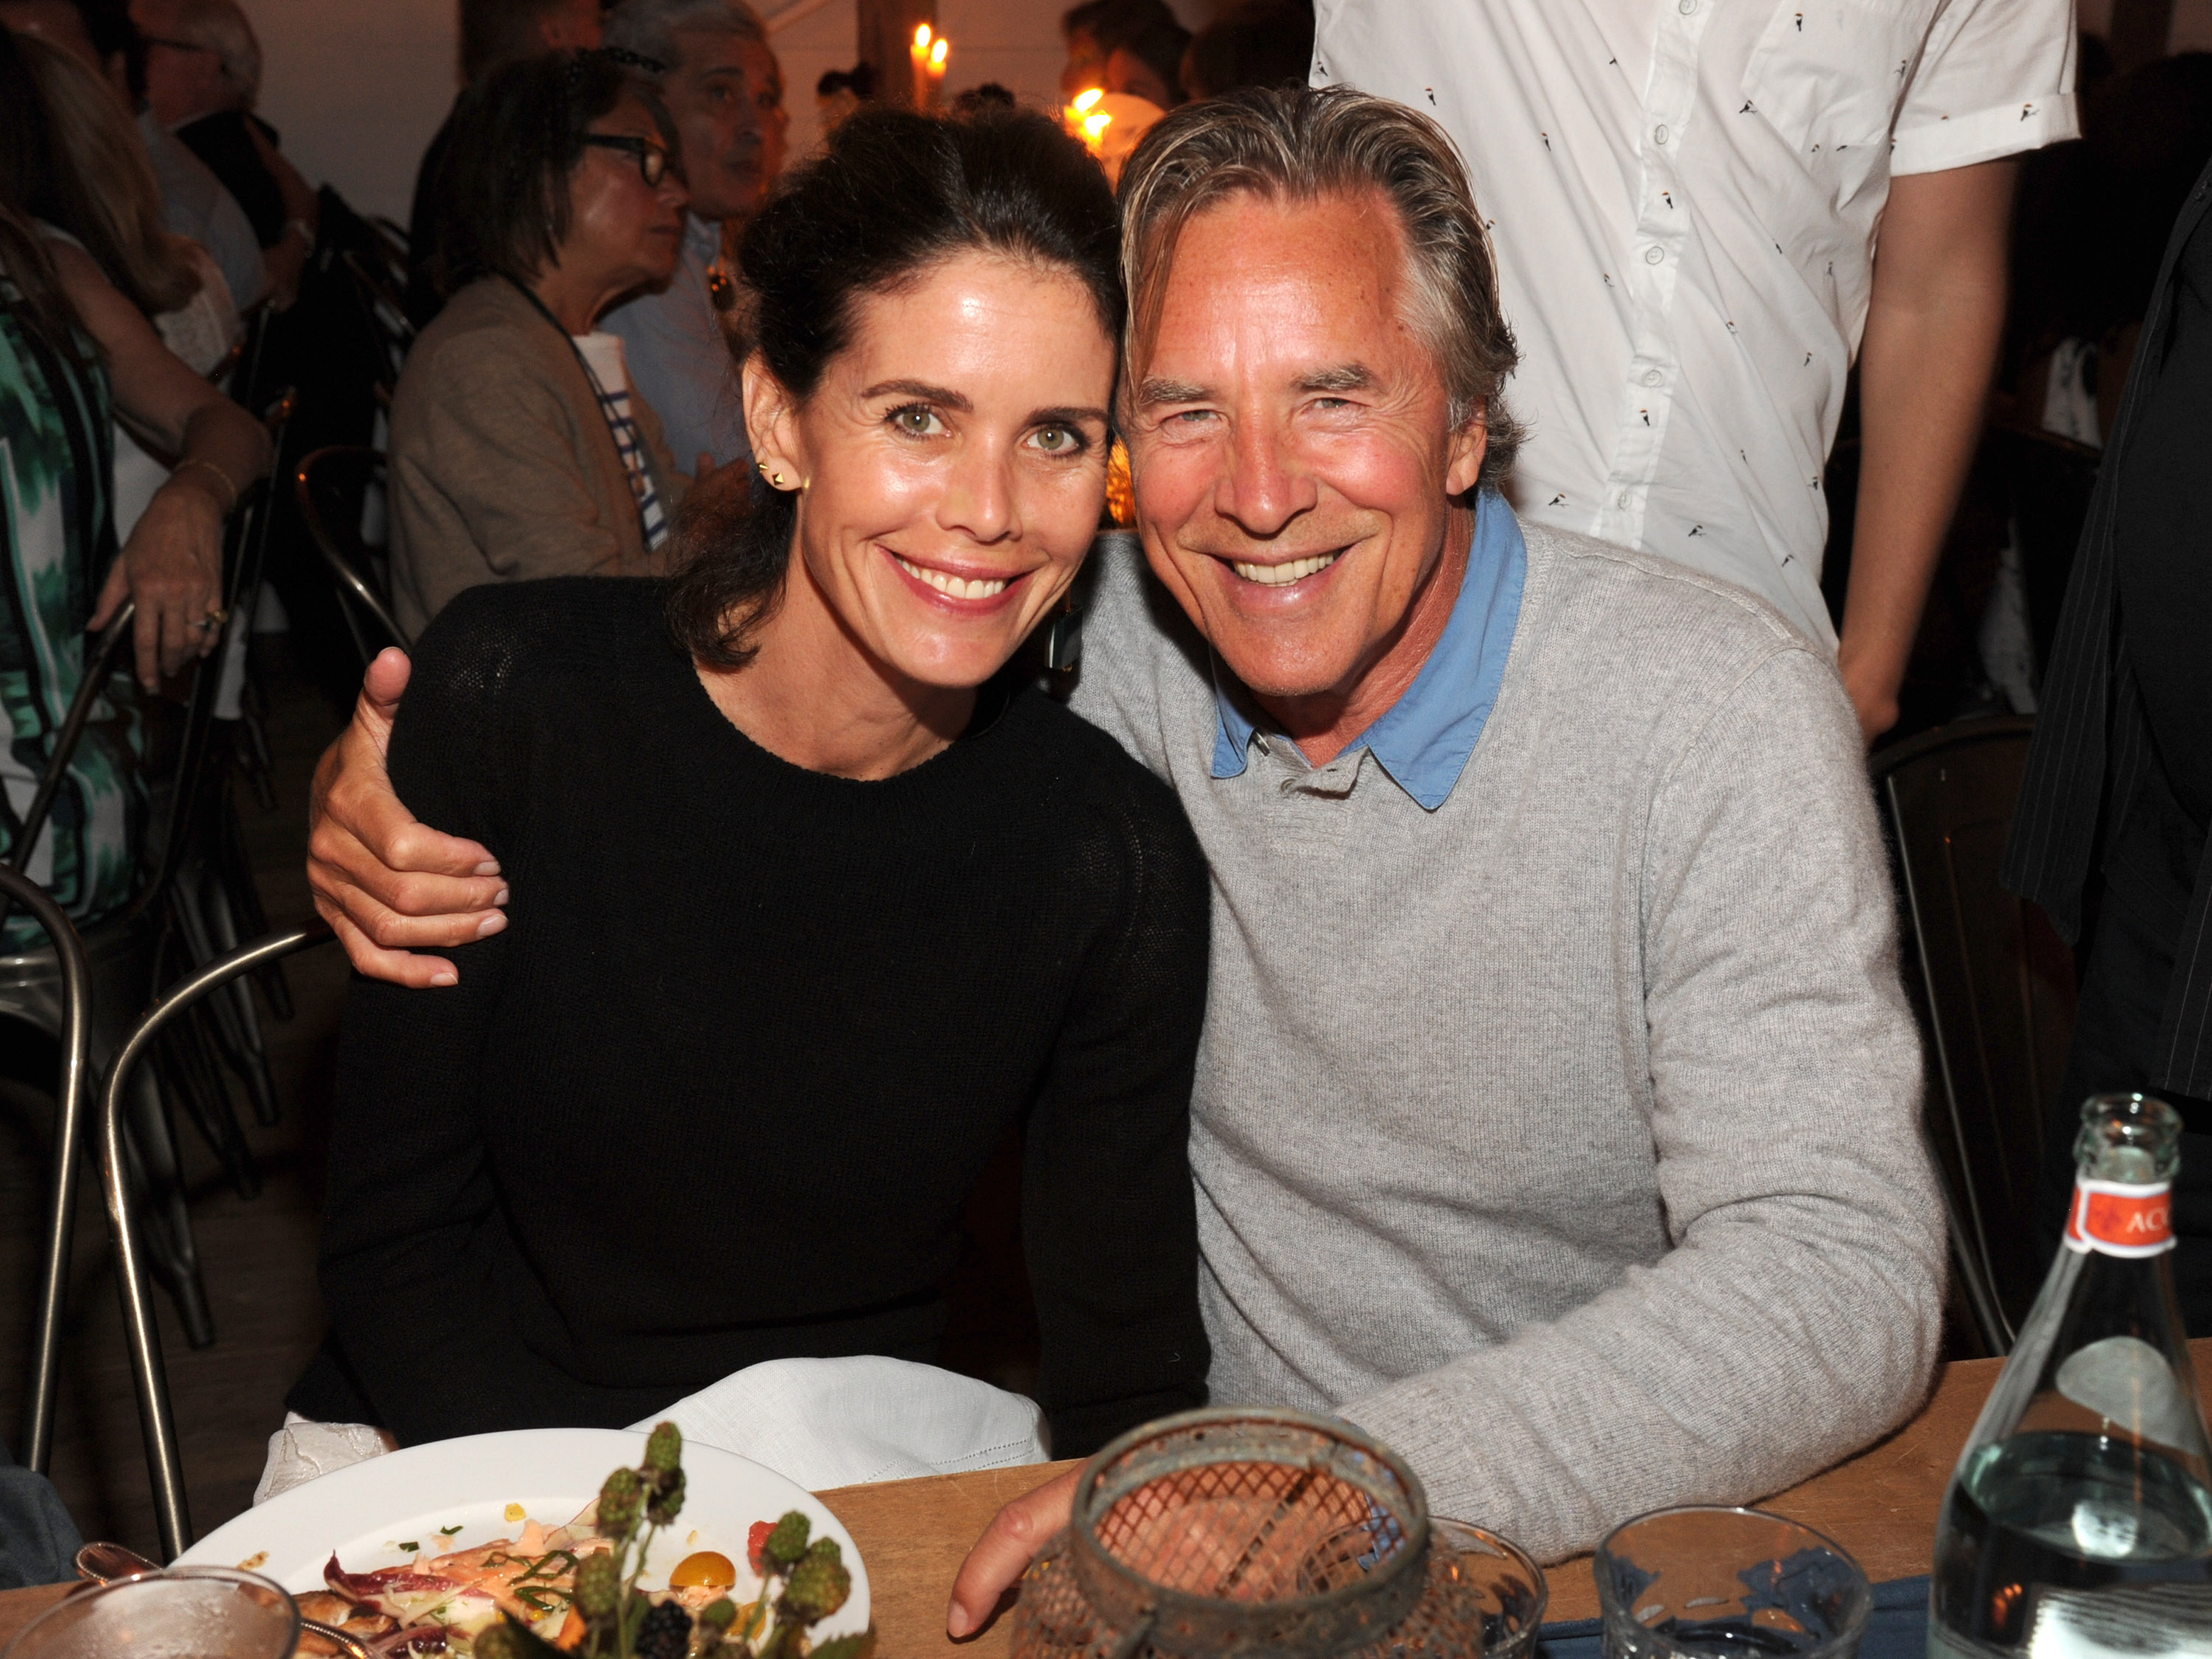 Kelley Phleger and Don Johnson in East Hampton, New York, on August 16, 2014 | Source: Getty Images